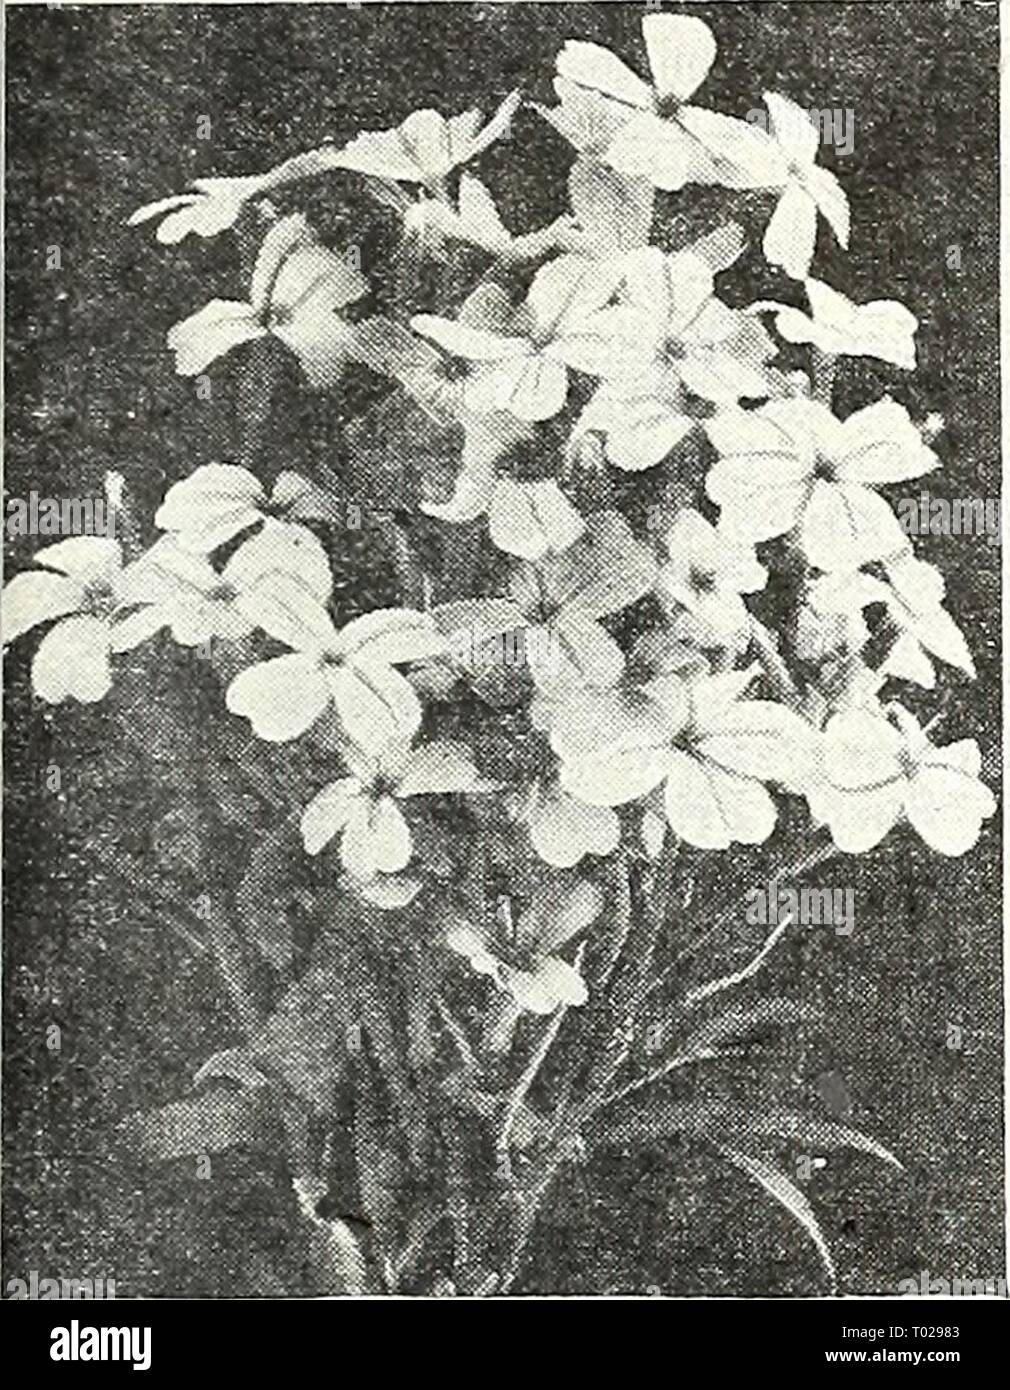 Dreer's garden book for 1947 . dreersgardenbook1947henr Year: 1947  Veronica—Speedweii Ihp] Attractive summer blooming plants highly valued for the rich blue shades irepresented. They are easy to grow in a sunny situation and require a well- drained soil. 4379 Incana. Bushy plants 2 ft. tall. Porcelain blue flowers in summer. Pkt. 25c; large pkt. 7Sc. 4380 Longifolia. Beautiful deep lav- ender-blue flowers in long racemes during the summer on bushy plants 2 ft. tall. Pkt. 15c; large pkt. SOc. 4385 Spicata. Graceful V/2 ft. plants with bright blue flowers in summer. Pkt. 15c; ;arge pkt. SOc.    Stock Photo